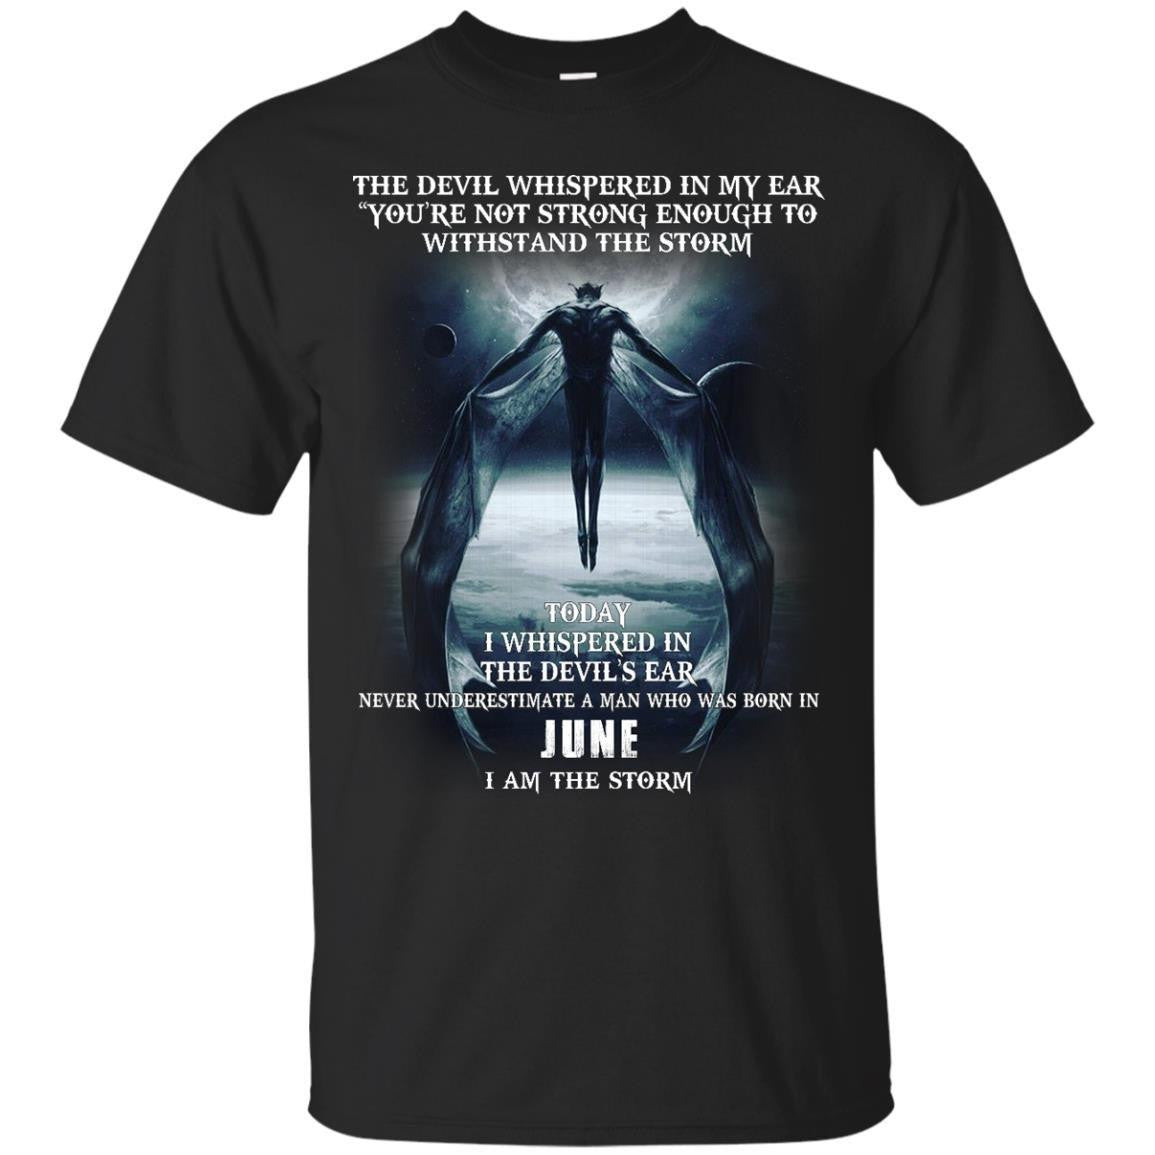 The Devil whispered in my ear, a Man born in June shirt, tank